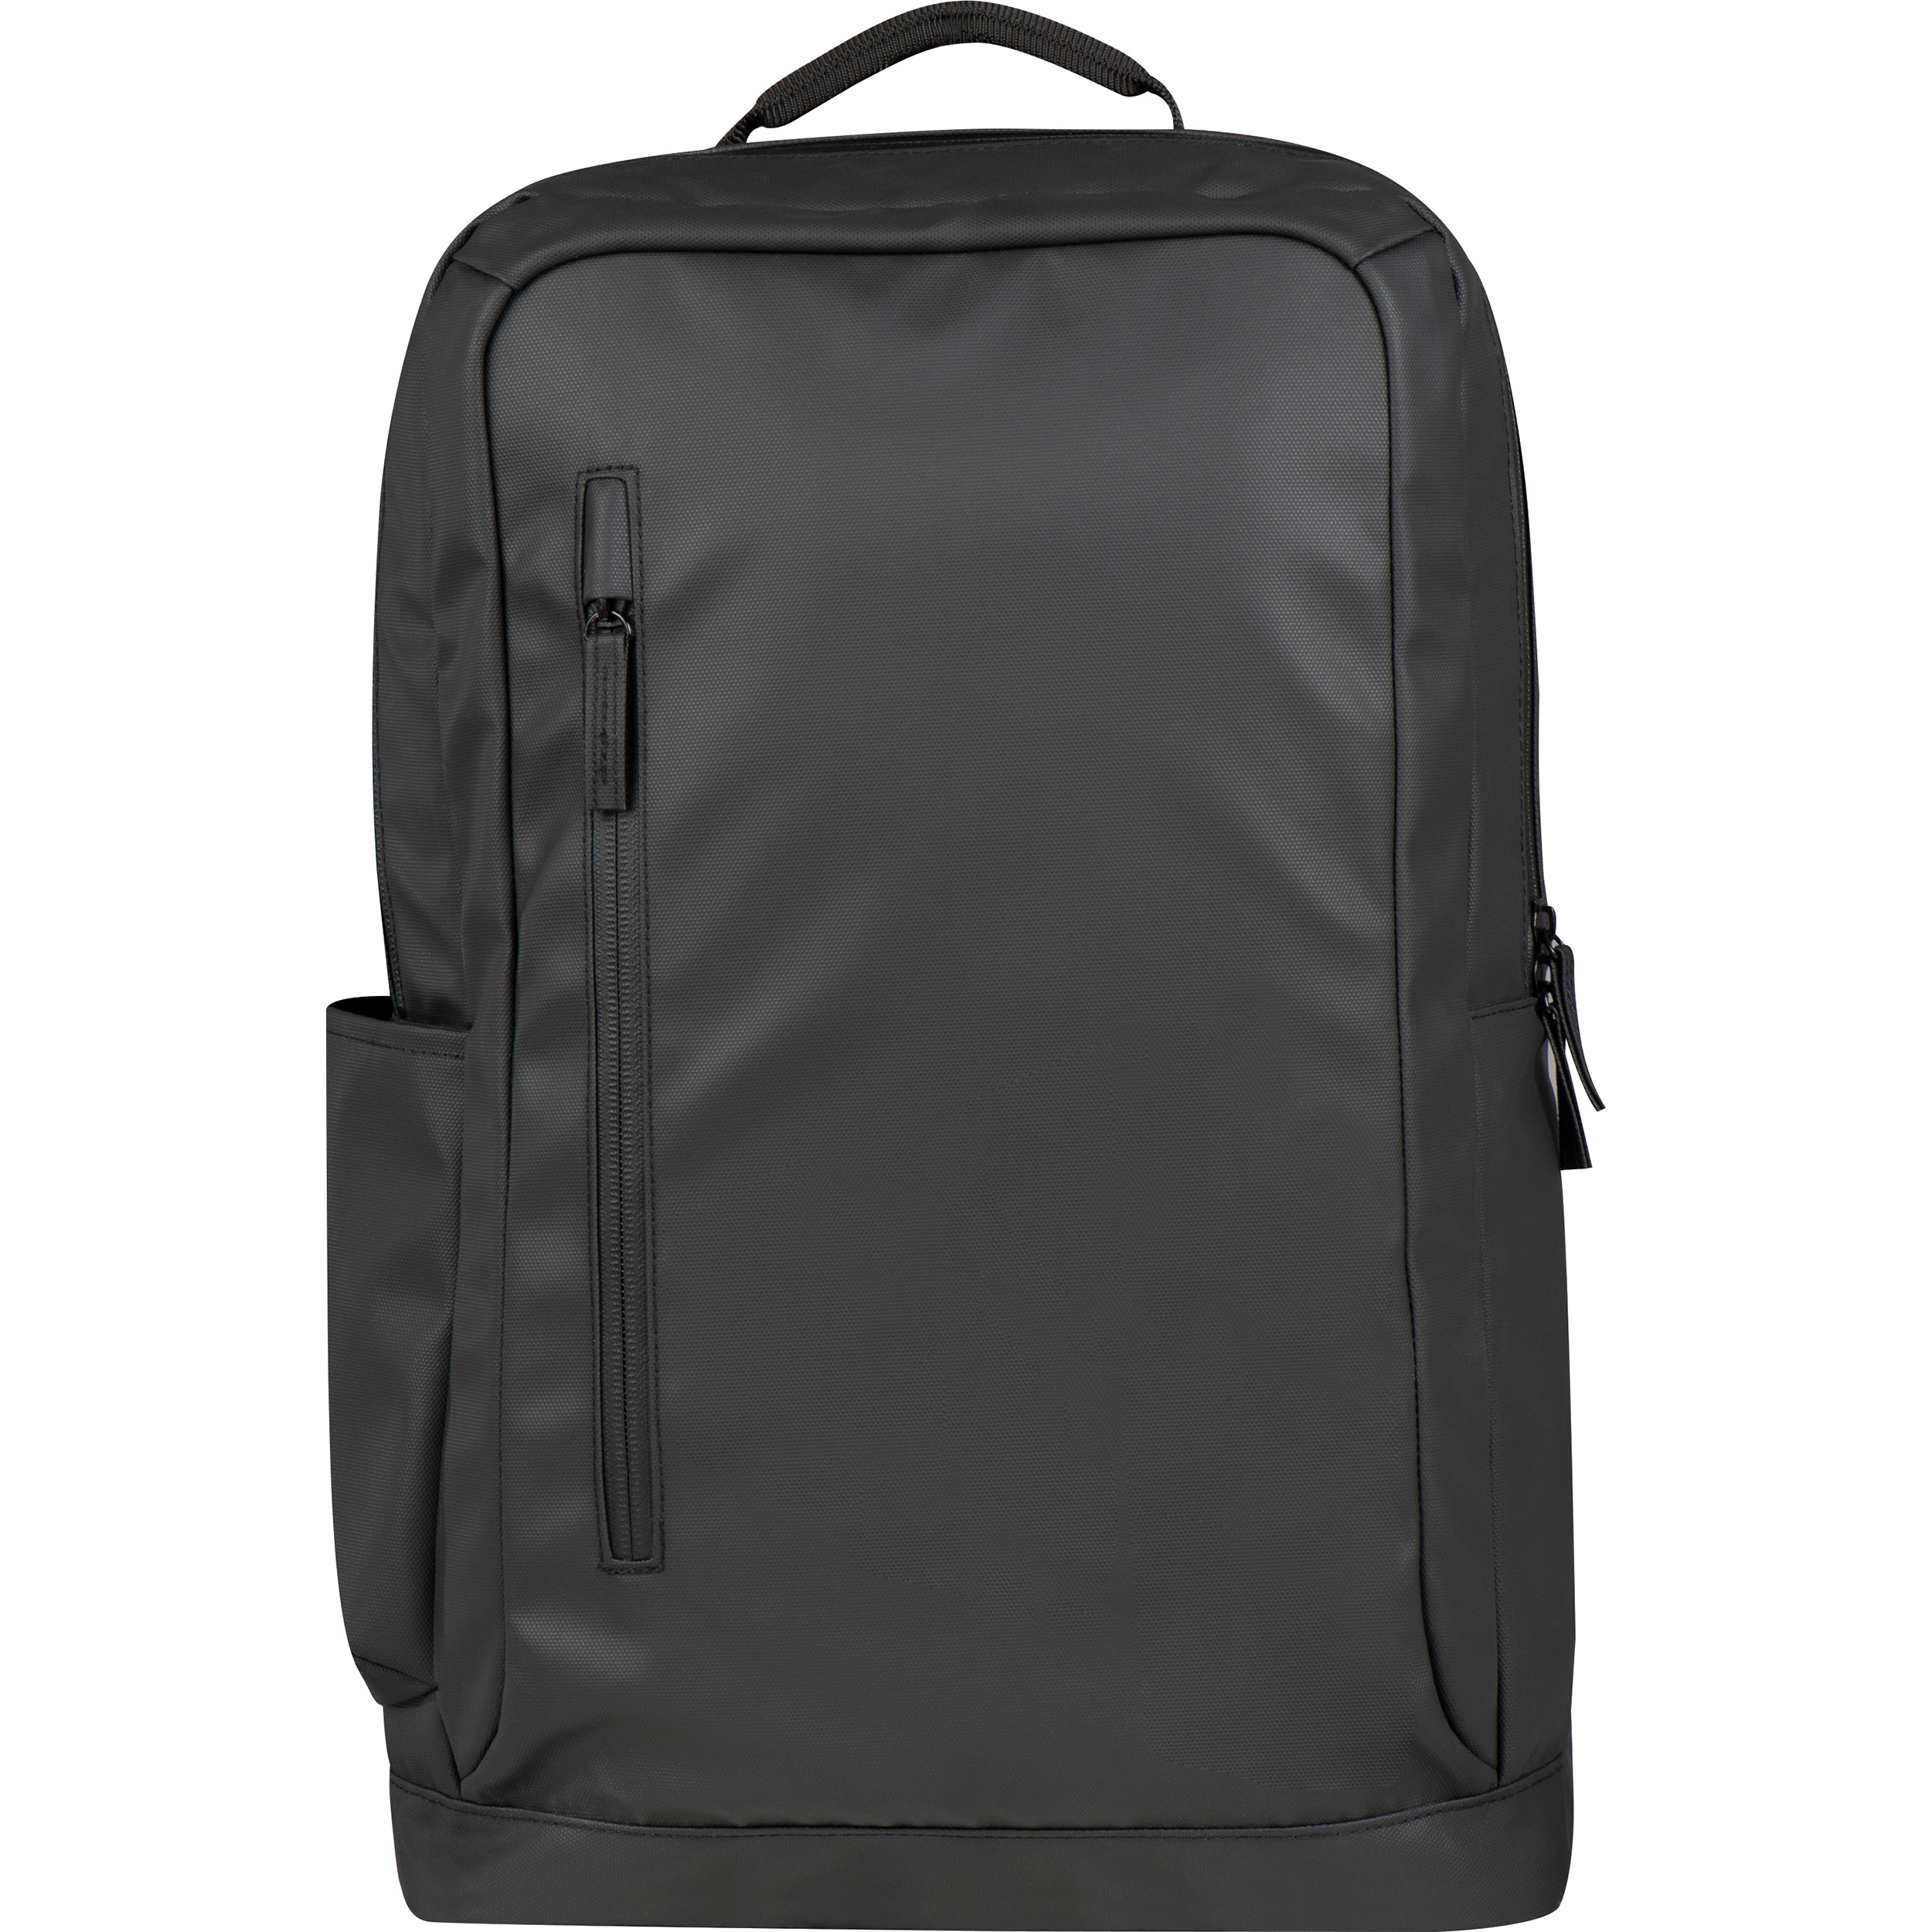 High-quality, water-resistant backpack